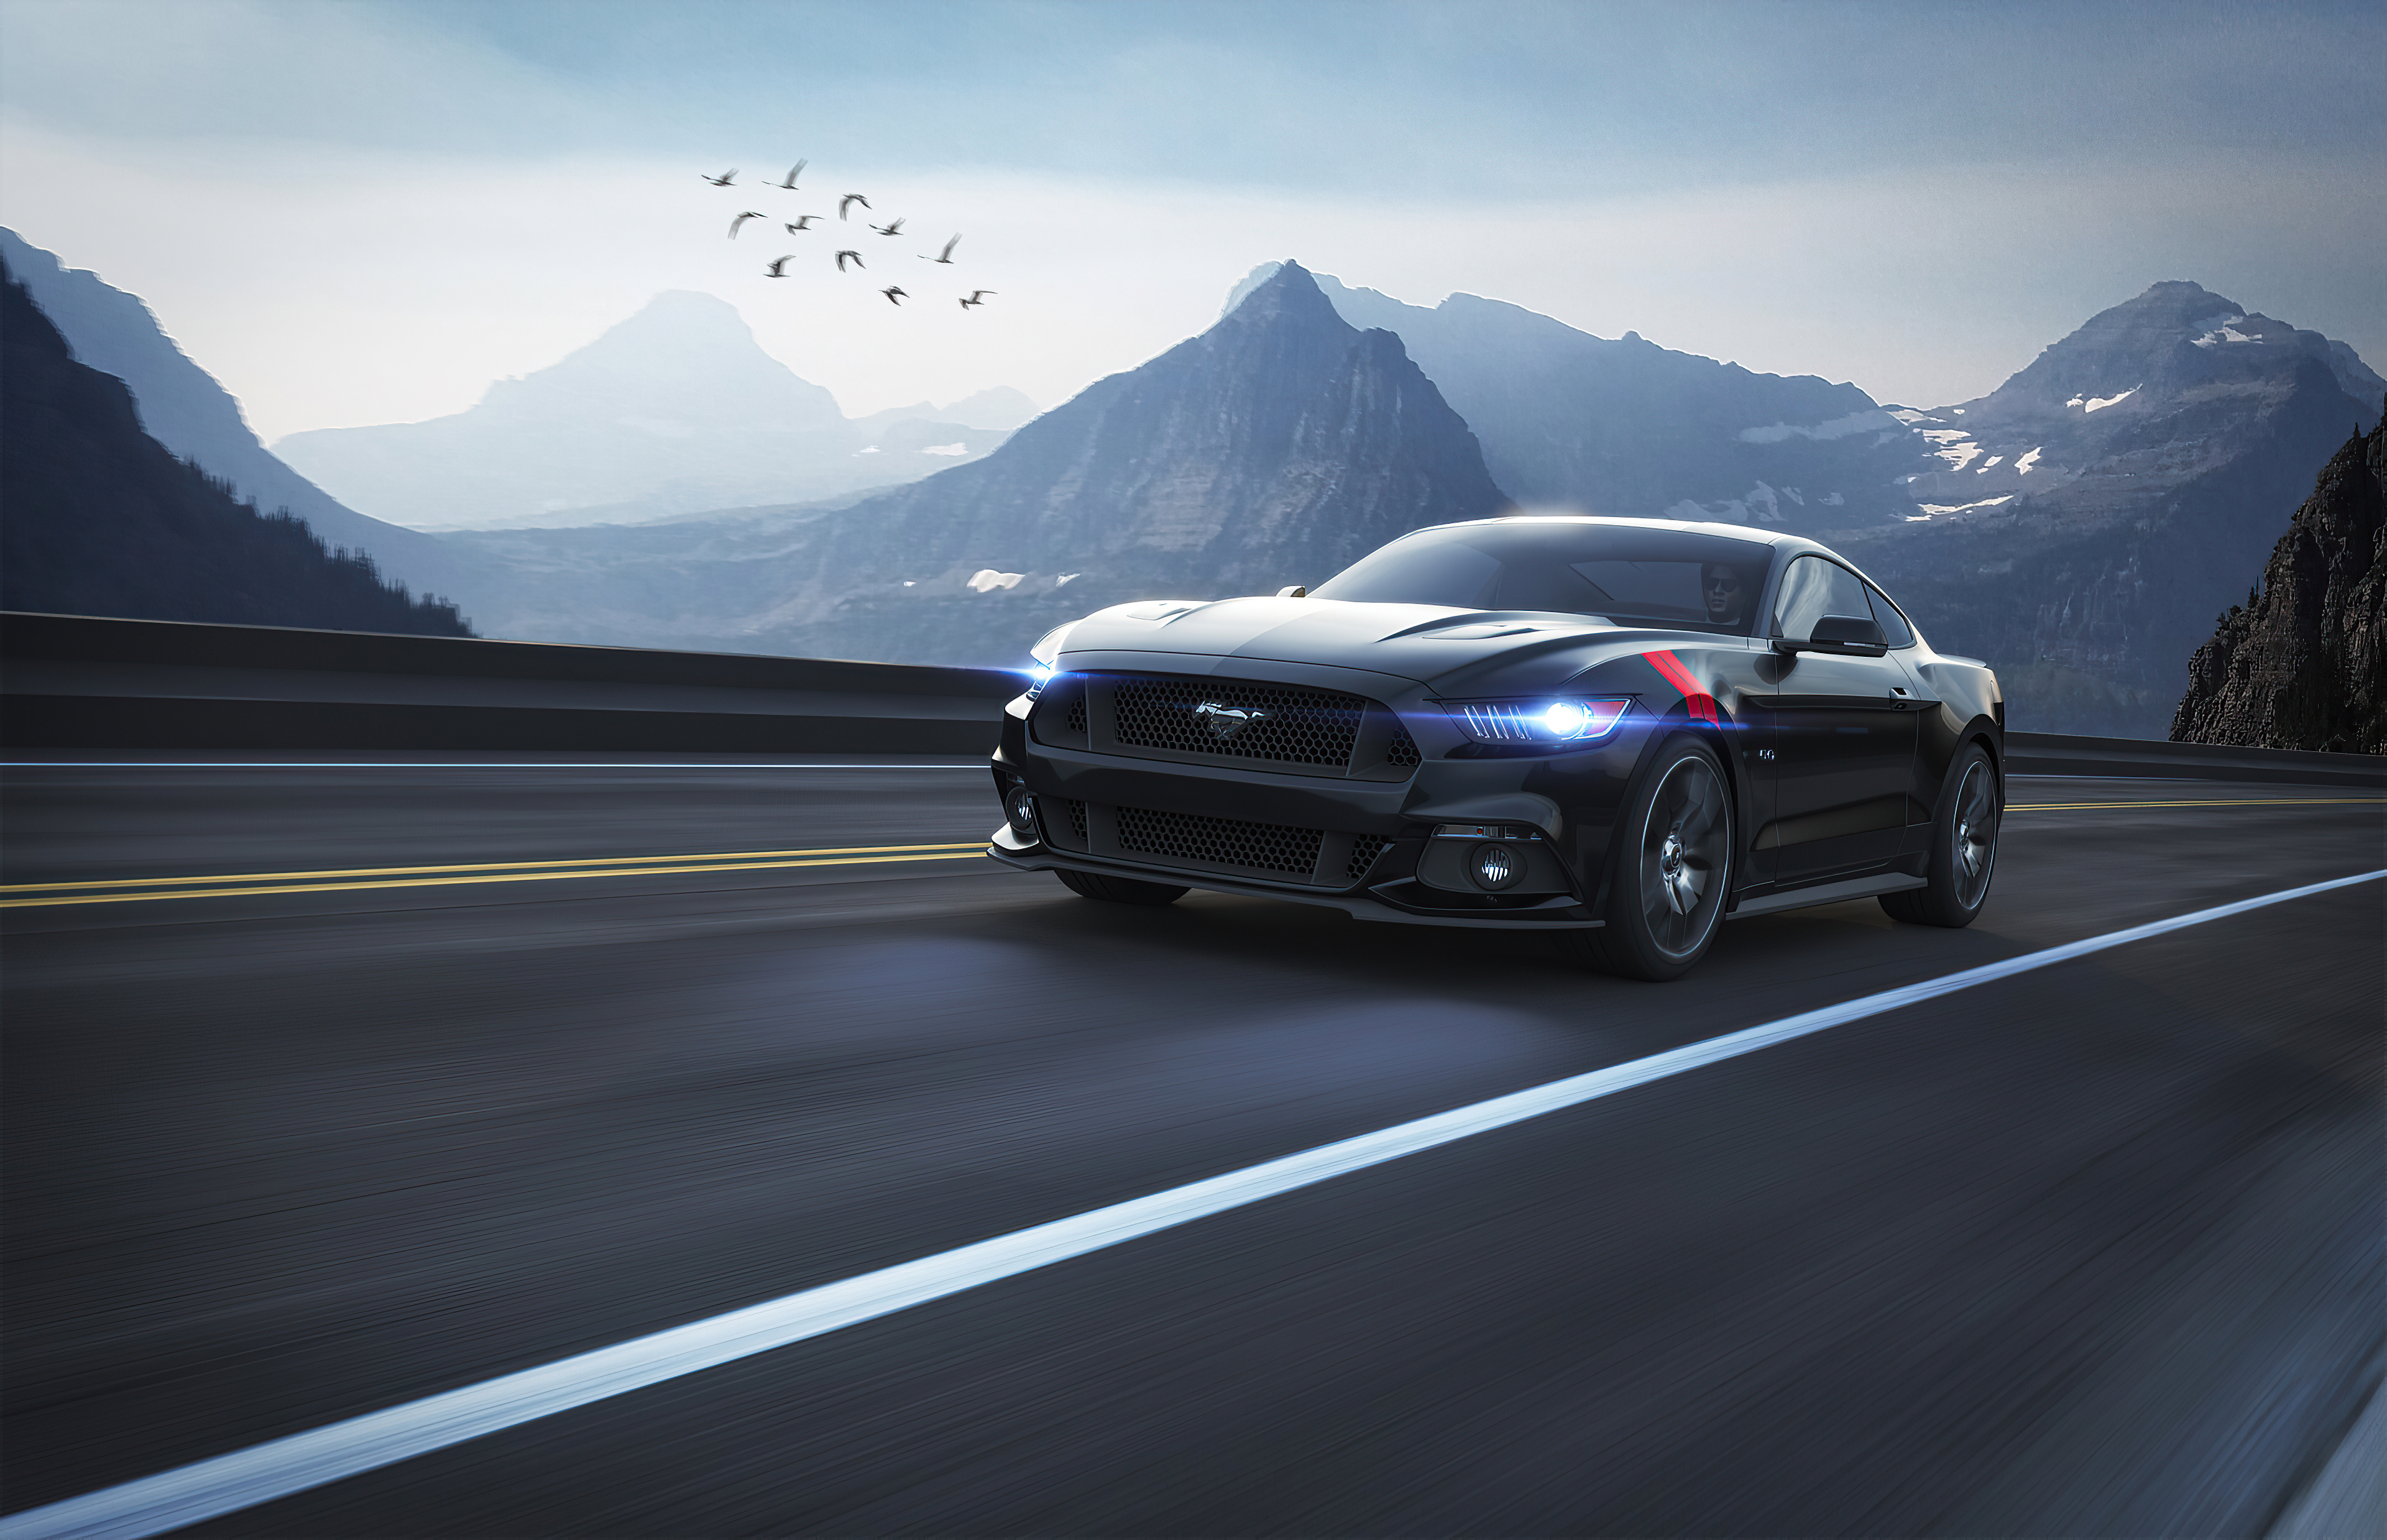 Black Ford Mustang 4k 2020, HD Cars, 4k Wallpapers, Images ...